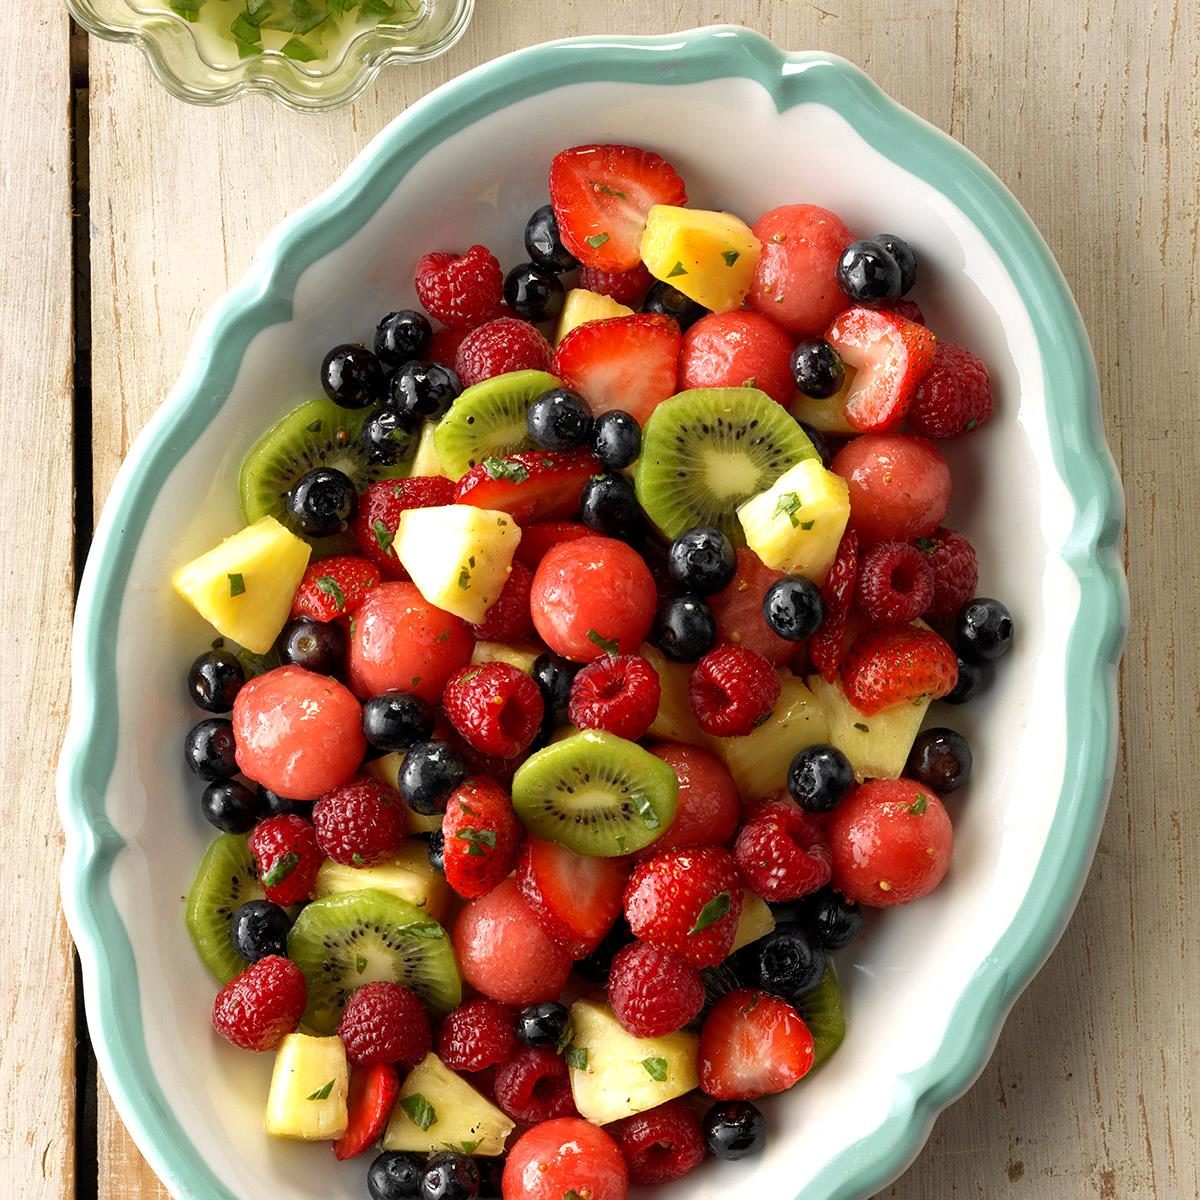 40 Stunning Fruit Salad Recipes to Make Any Time of Year